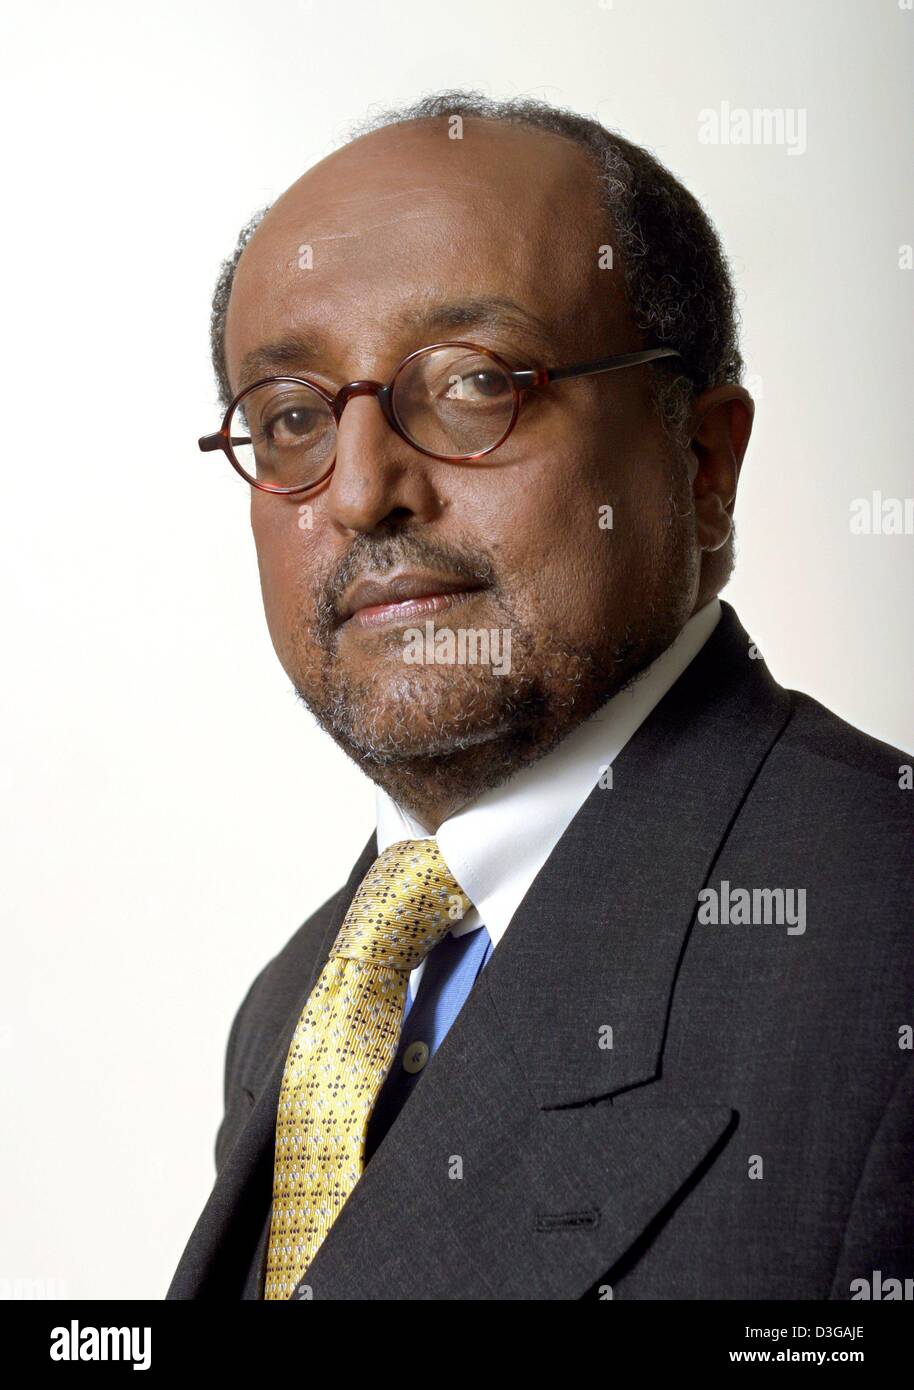 (dpa) - Ethiopian prince and grandnephew of emperor Haile Selassie, Asfa-Wossen Asserate, in a picture taken in Mainz, Germany, 16 January 2004. Asserate has been living in Germany for decades and works as a consultant. In 2003 he released his book 'Manieren' (manners). Stock Photo